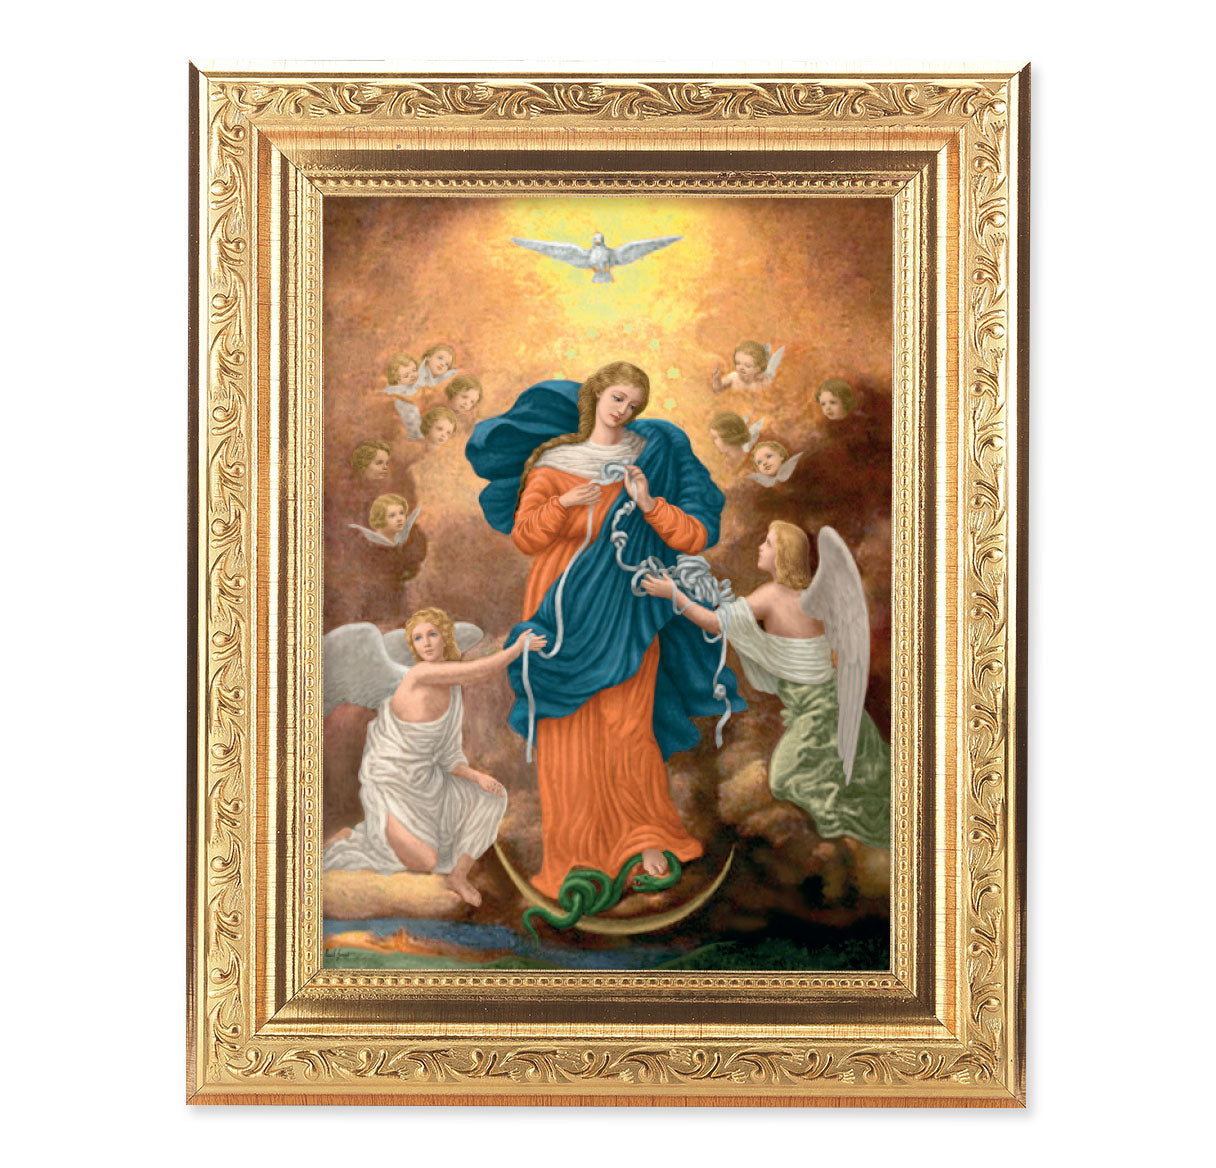 Our Lady Untier of Knots Antique Gold Framed Art